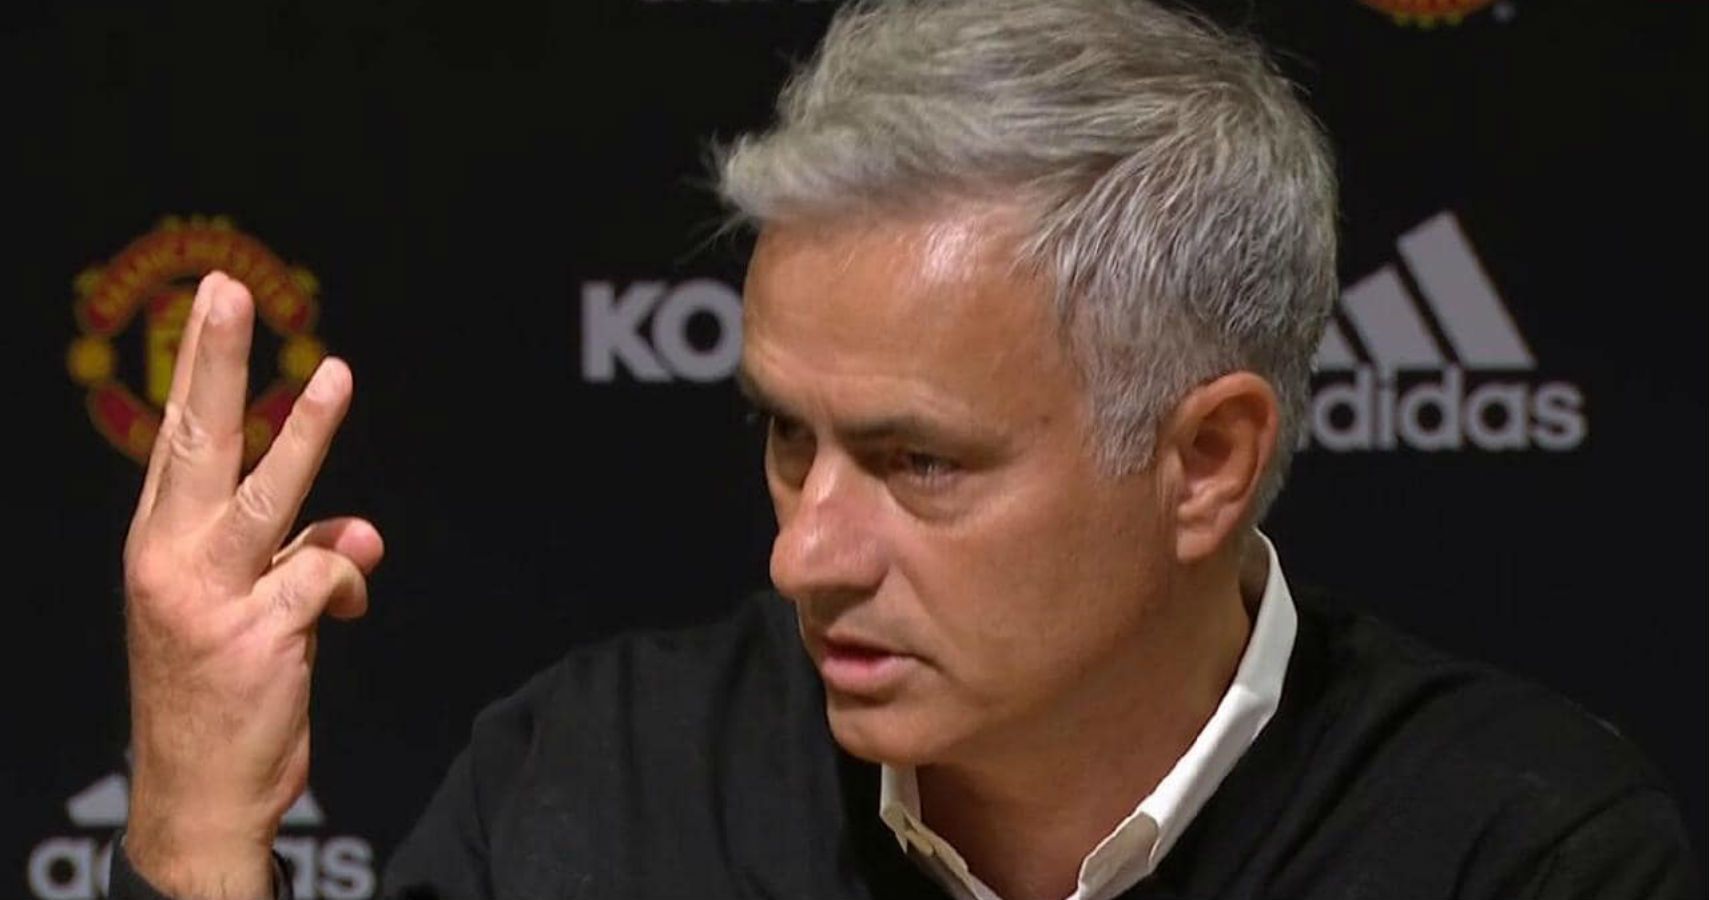  Jose Mourinho is shown talking at a press conference making a three sign with his fingers.